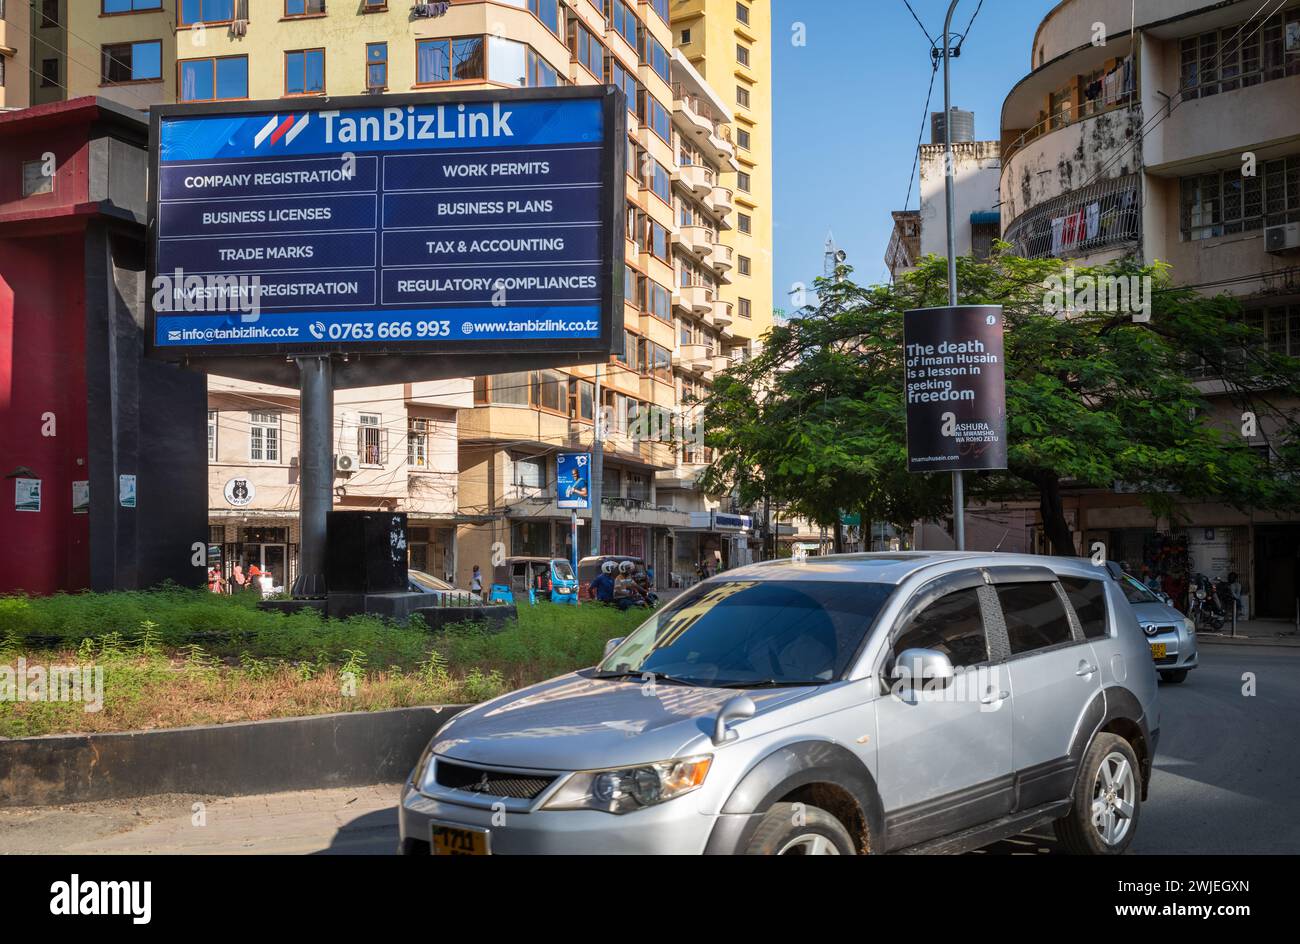 Cars on a roundabout go past a hoarding advertising business regiatration, planning and tax services in Dar es Salaam, Tanzania. Stock Photo